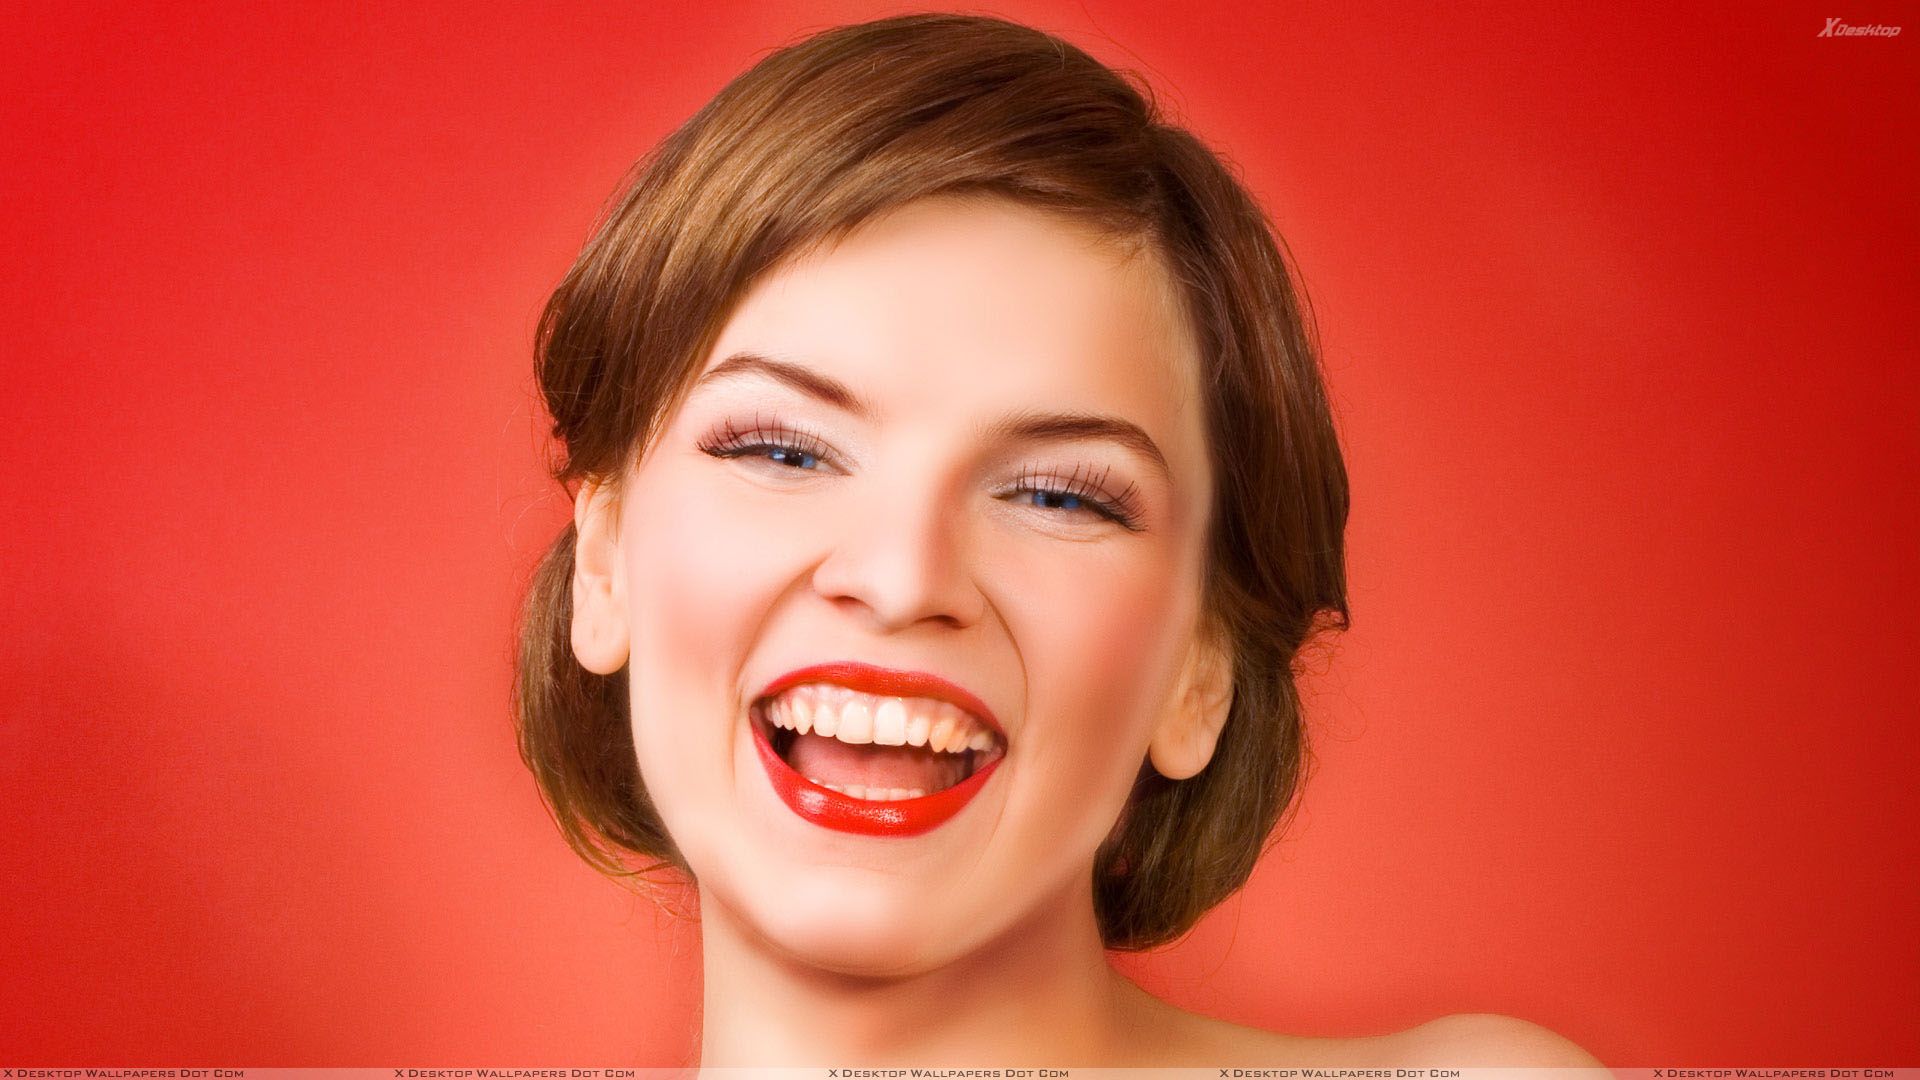 Girl Laughing Madly Face Closeup & Red Background Wallpaper